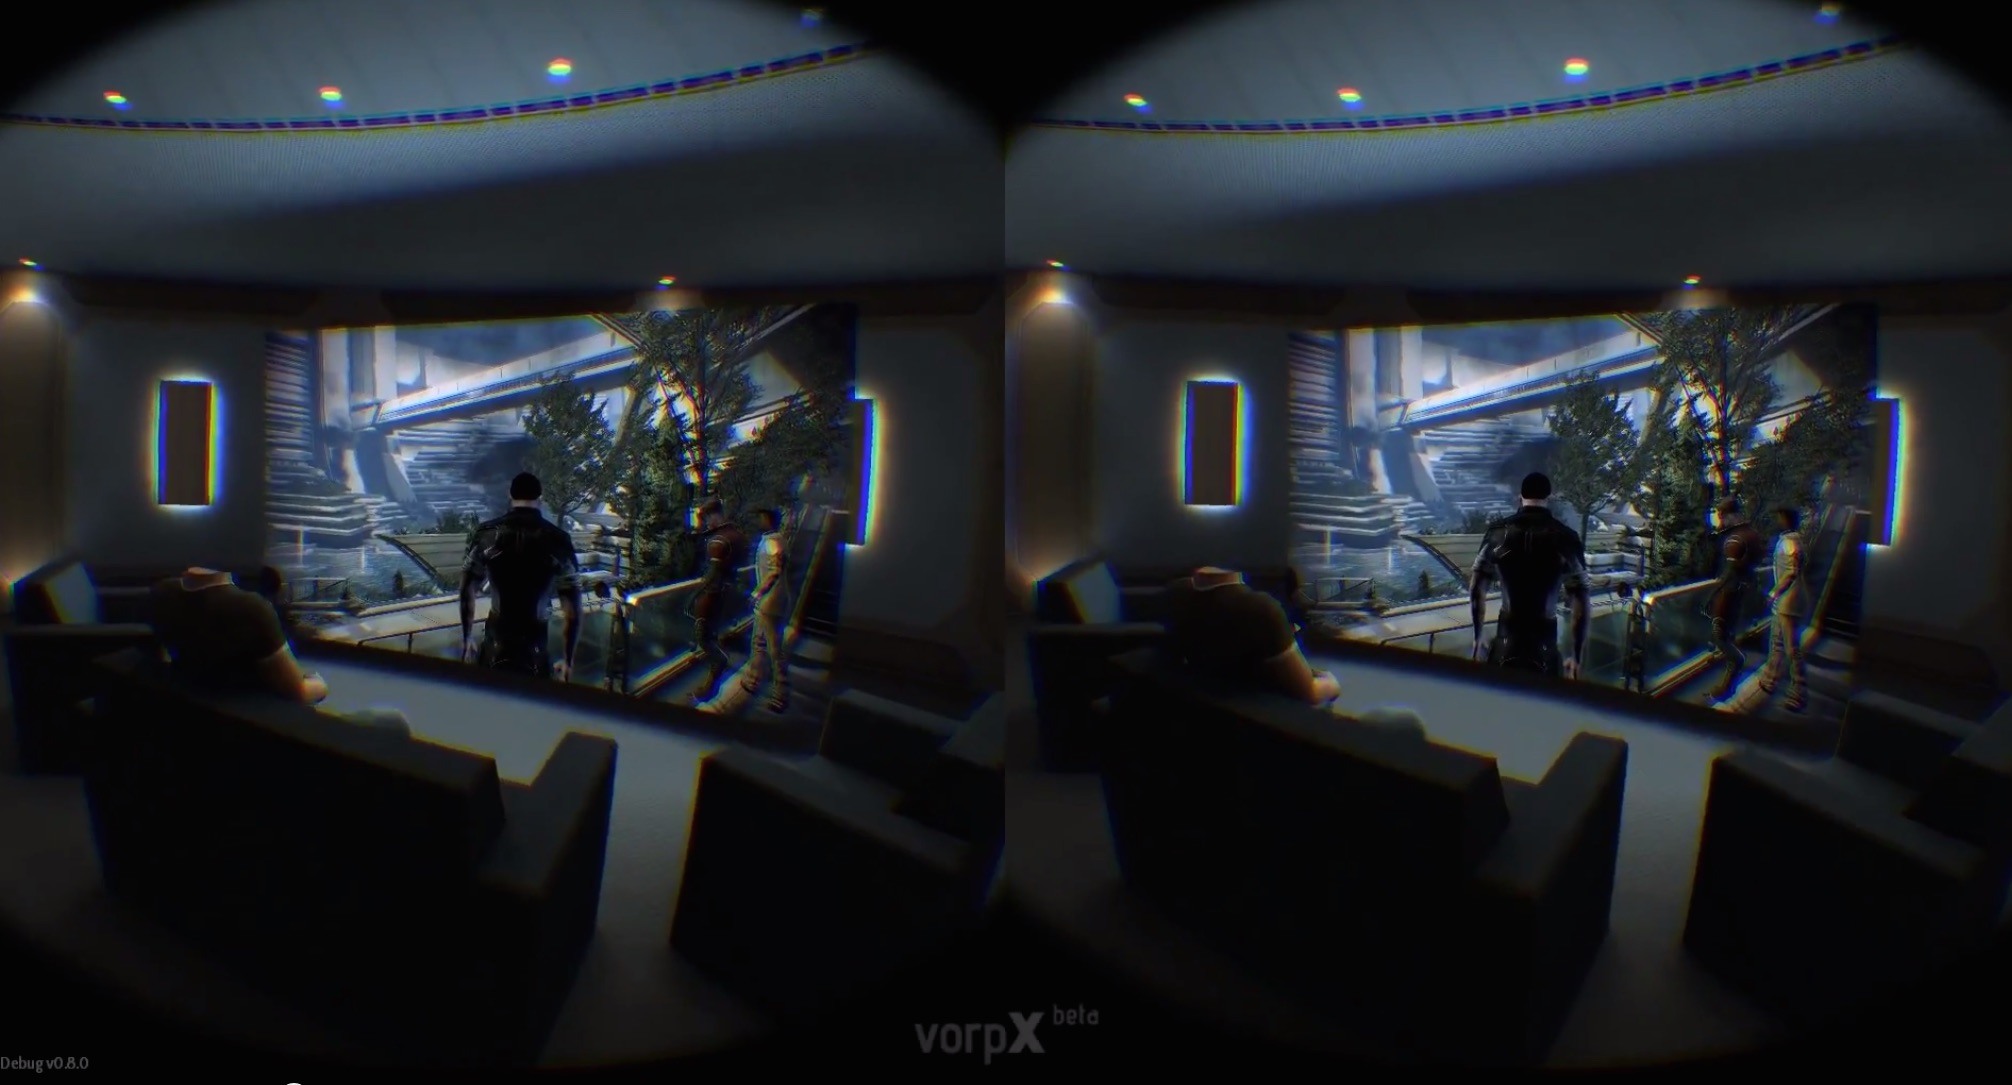 VorpX's New Virtual Cinema Lets You Play Non-VR Games on a Big Screen – to